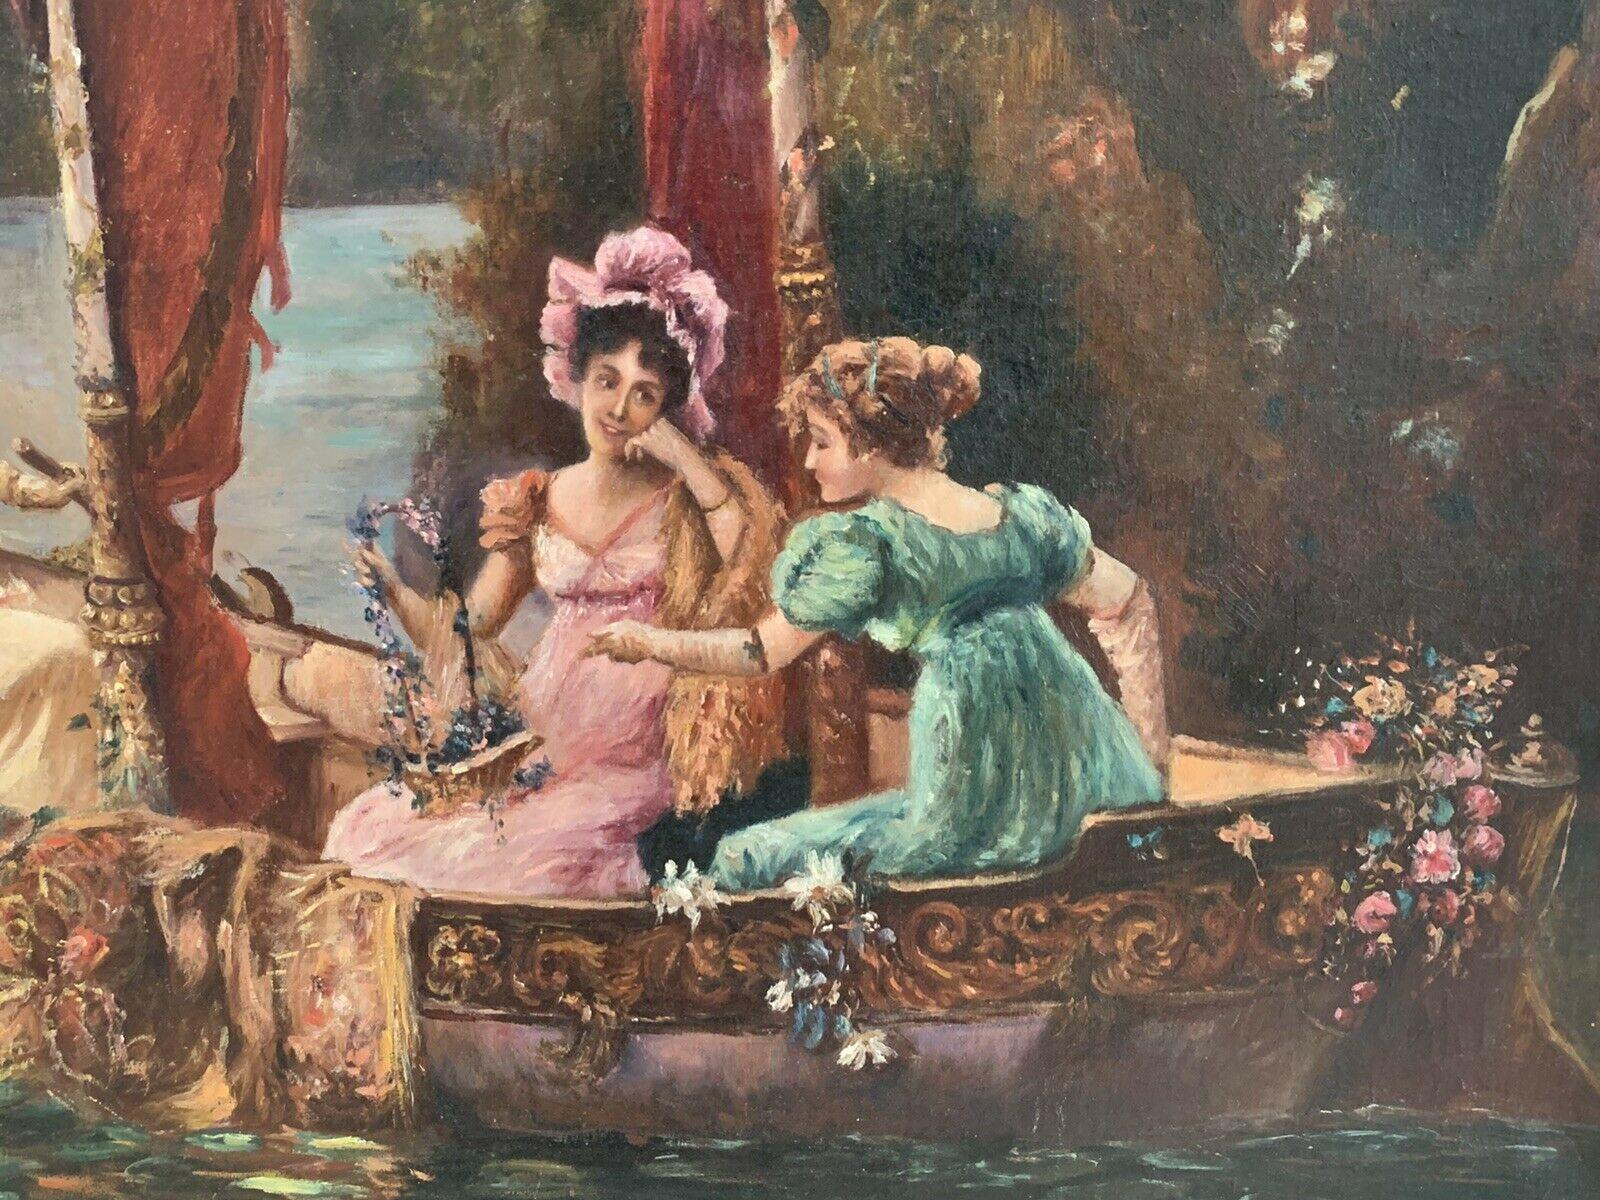 C. 1900 FRENCH BELLE EPOQUE HUGE OIL PAINTING - ELEGANT LADIES BOATING ON LAKE - Rococo Painting by Unknown